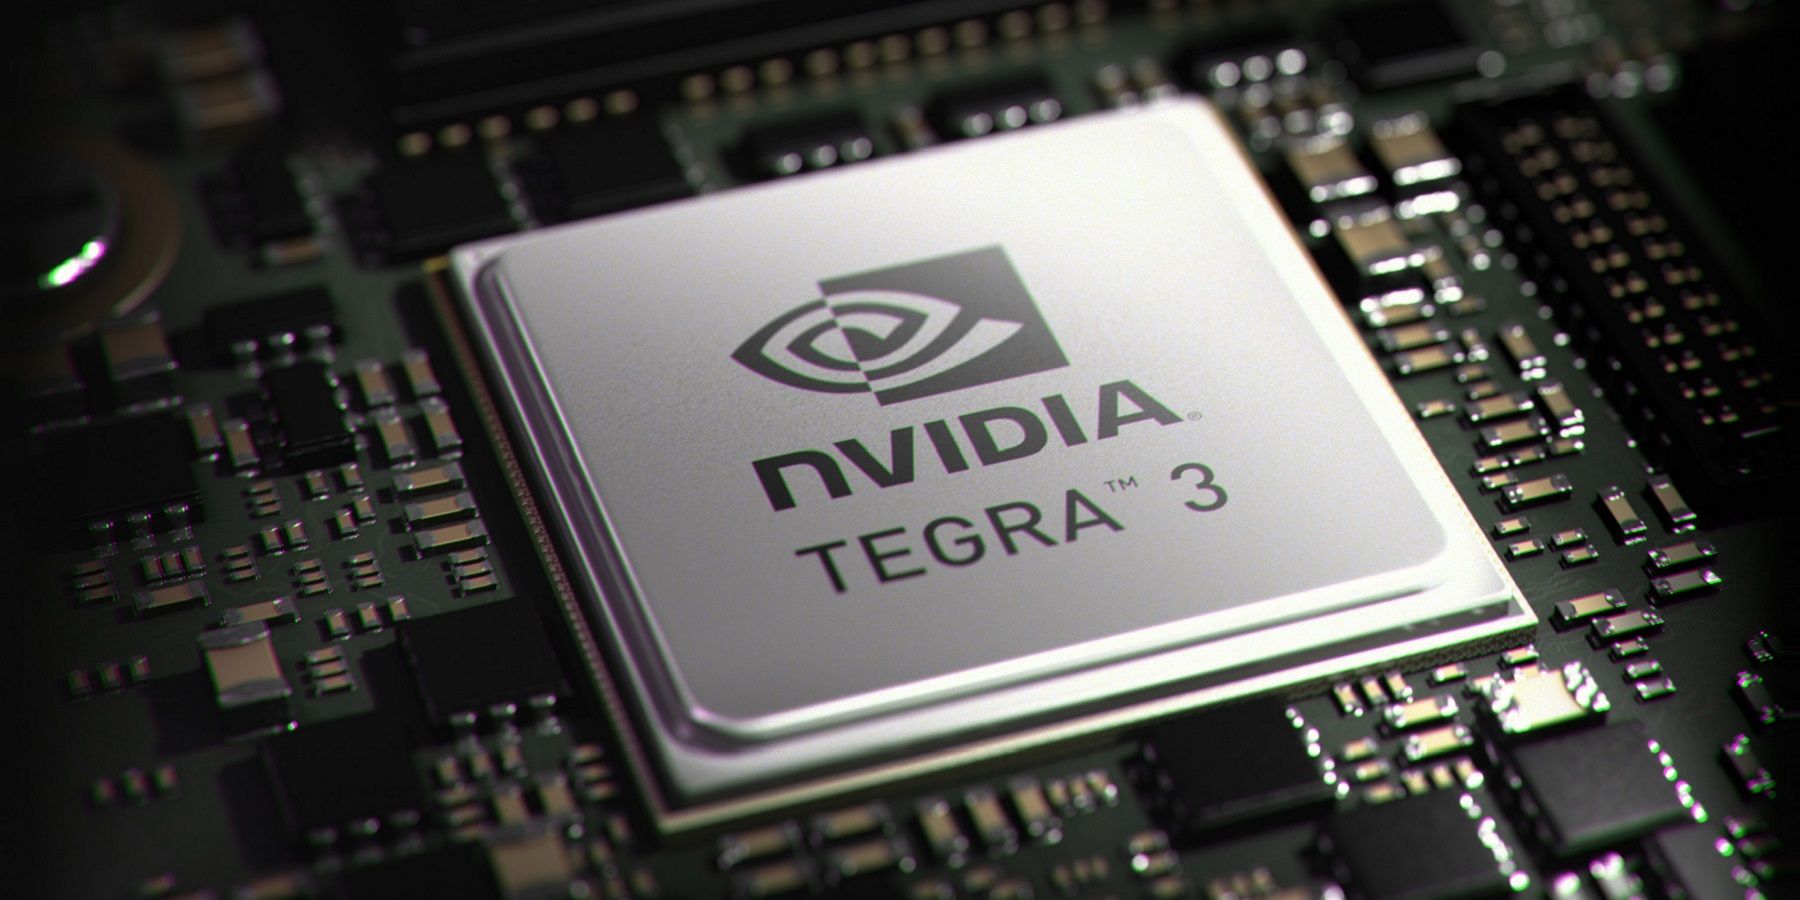 Photo of an Nvidia TEGRA 3 chip in a motherboard.